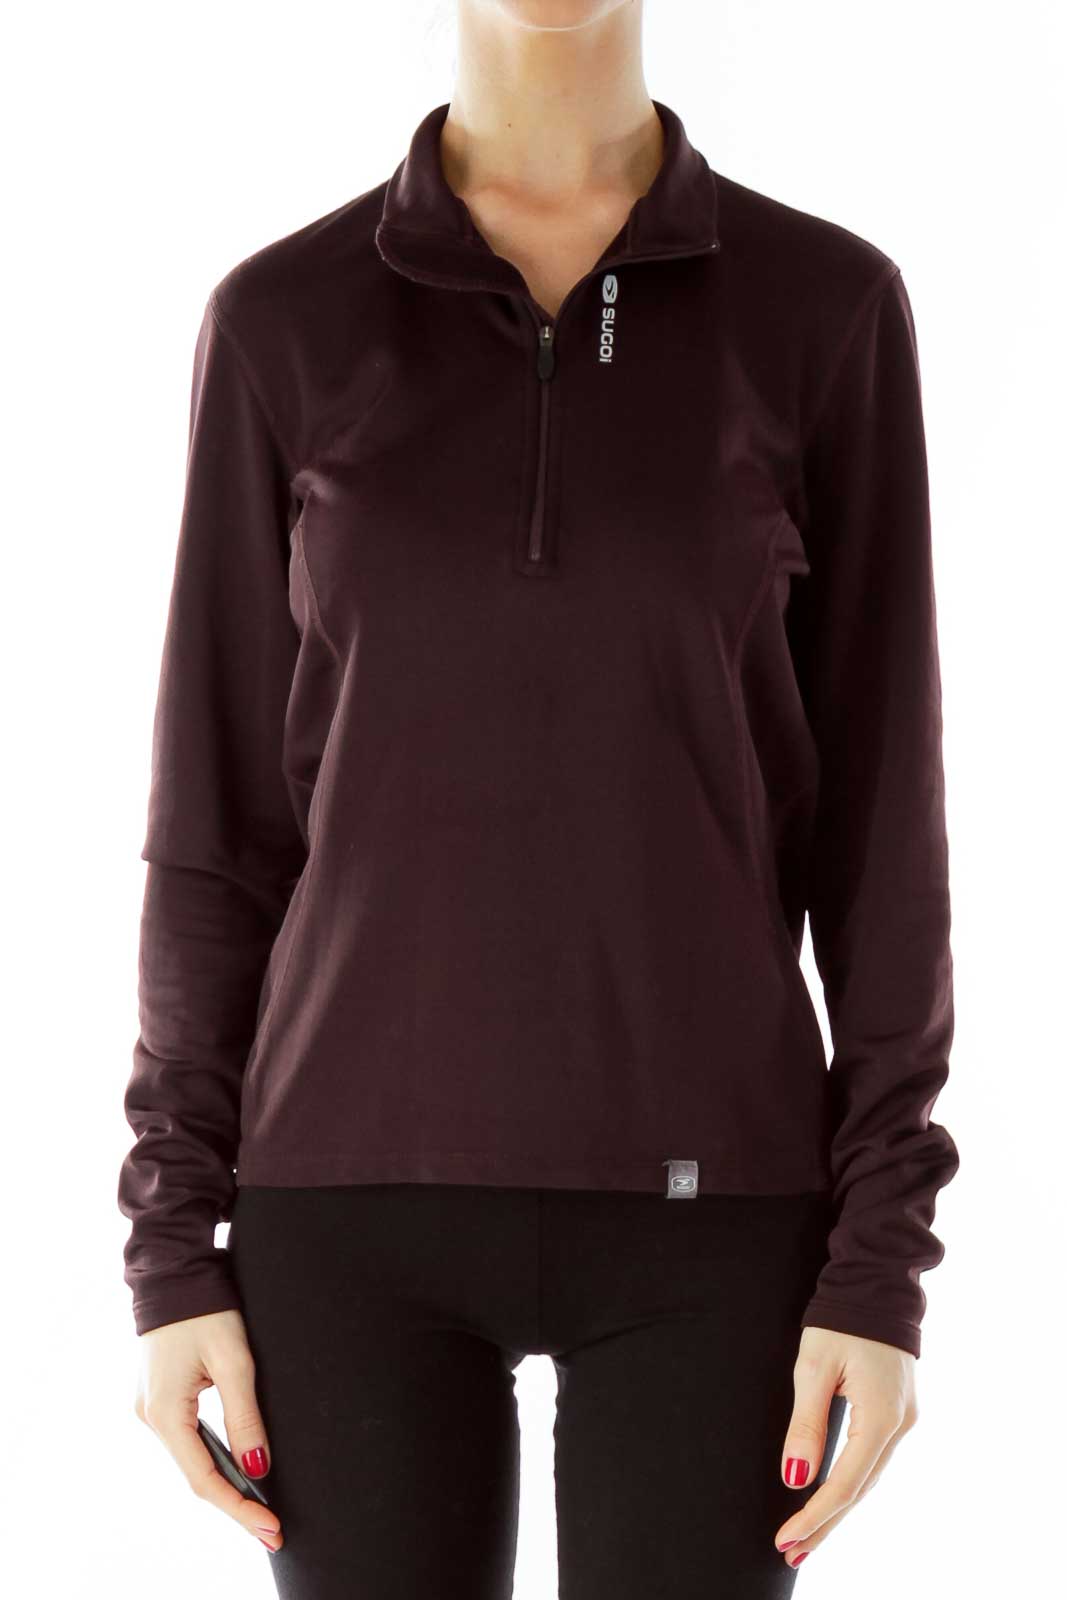 Brown Zippered Sports Top Front